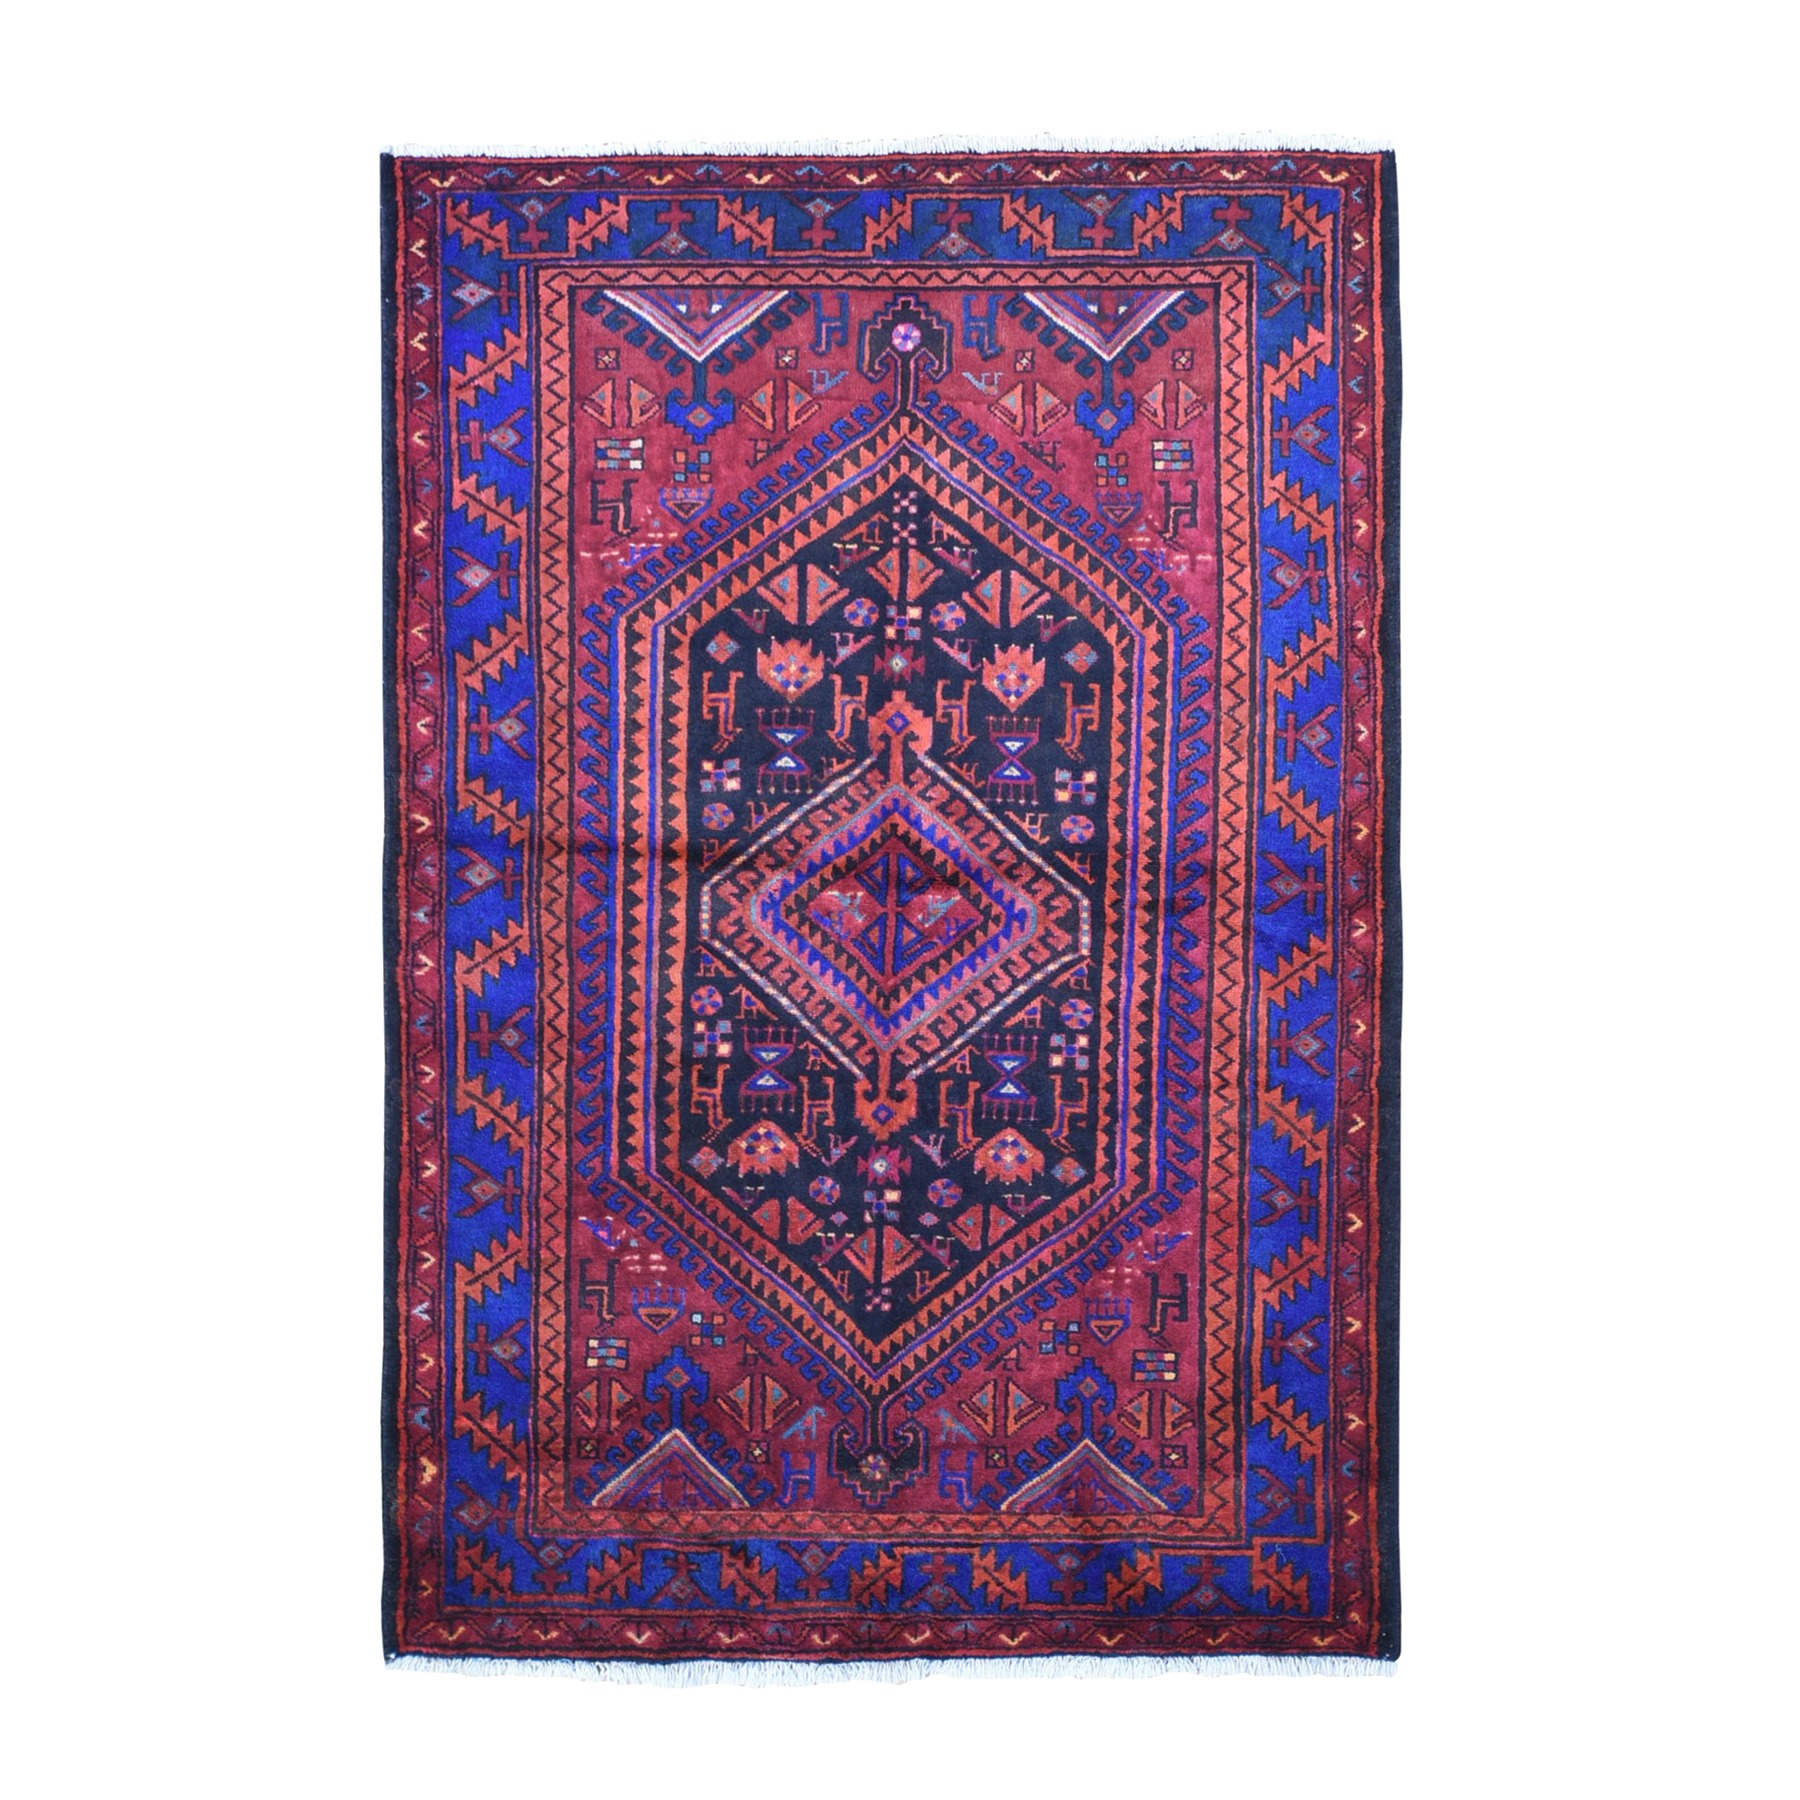 4'6"x6'10" New Persian Hamadan with Bright Colors Pure Wool Animal Figurines Hand Woven Oriental Rug 